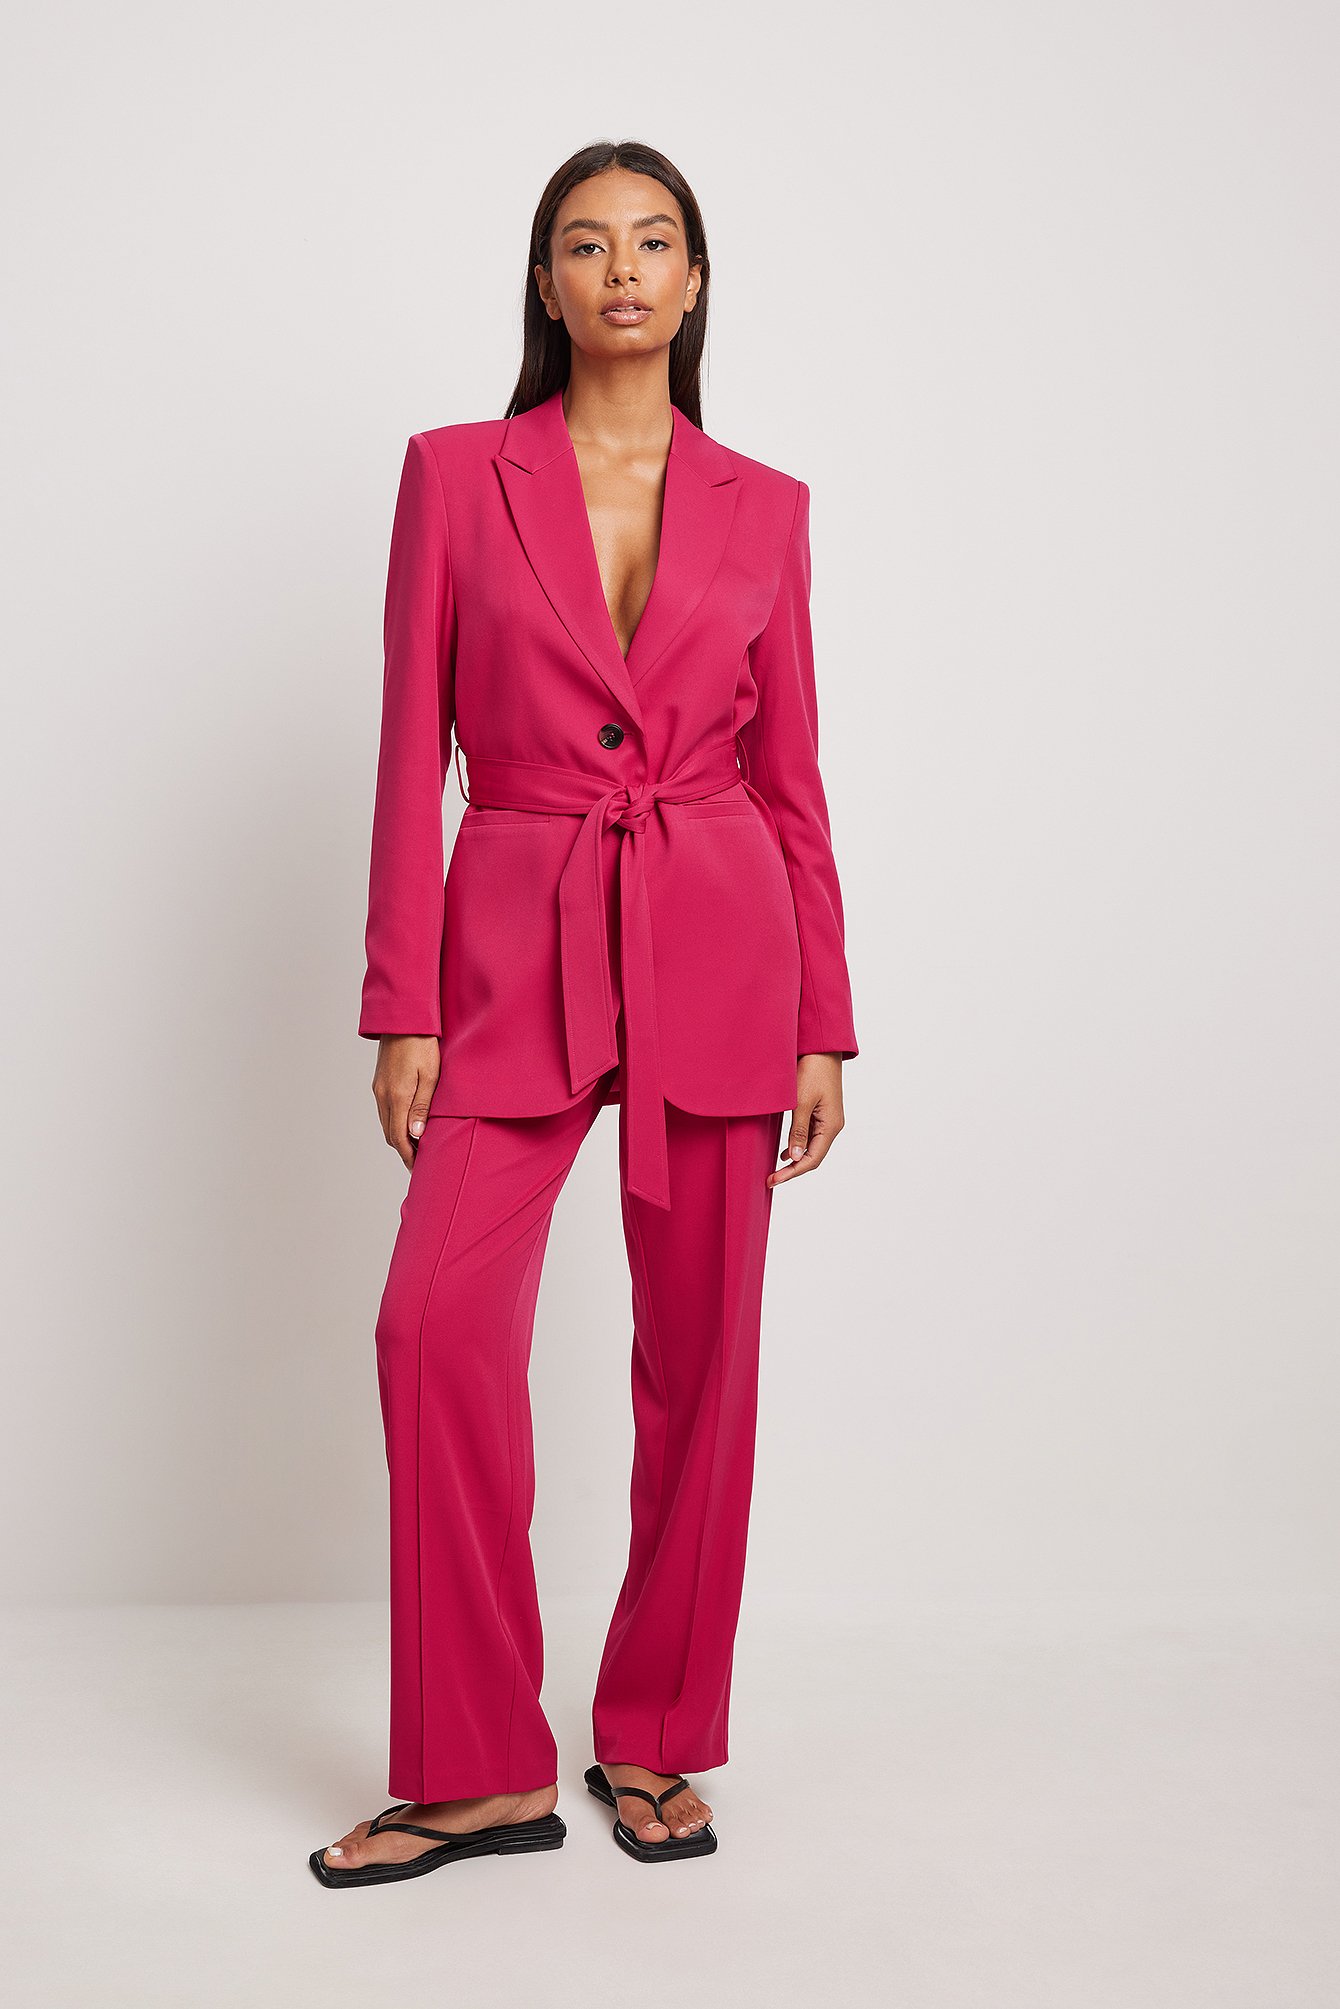 NEW IN PRODUCT NAME - GULELIZA COLLARED BELTED JACKET & PANT SUIT